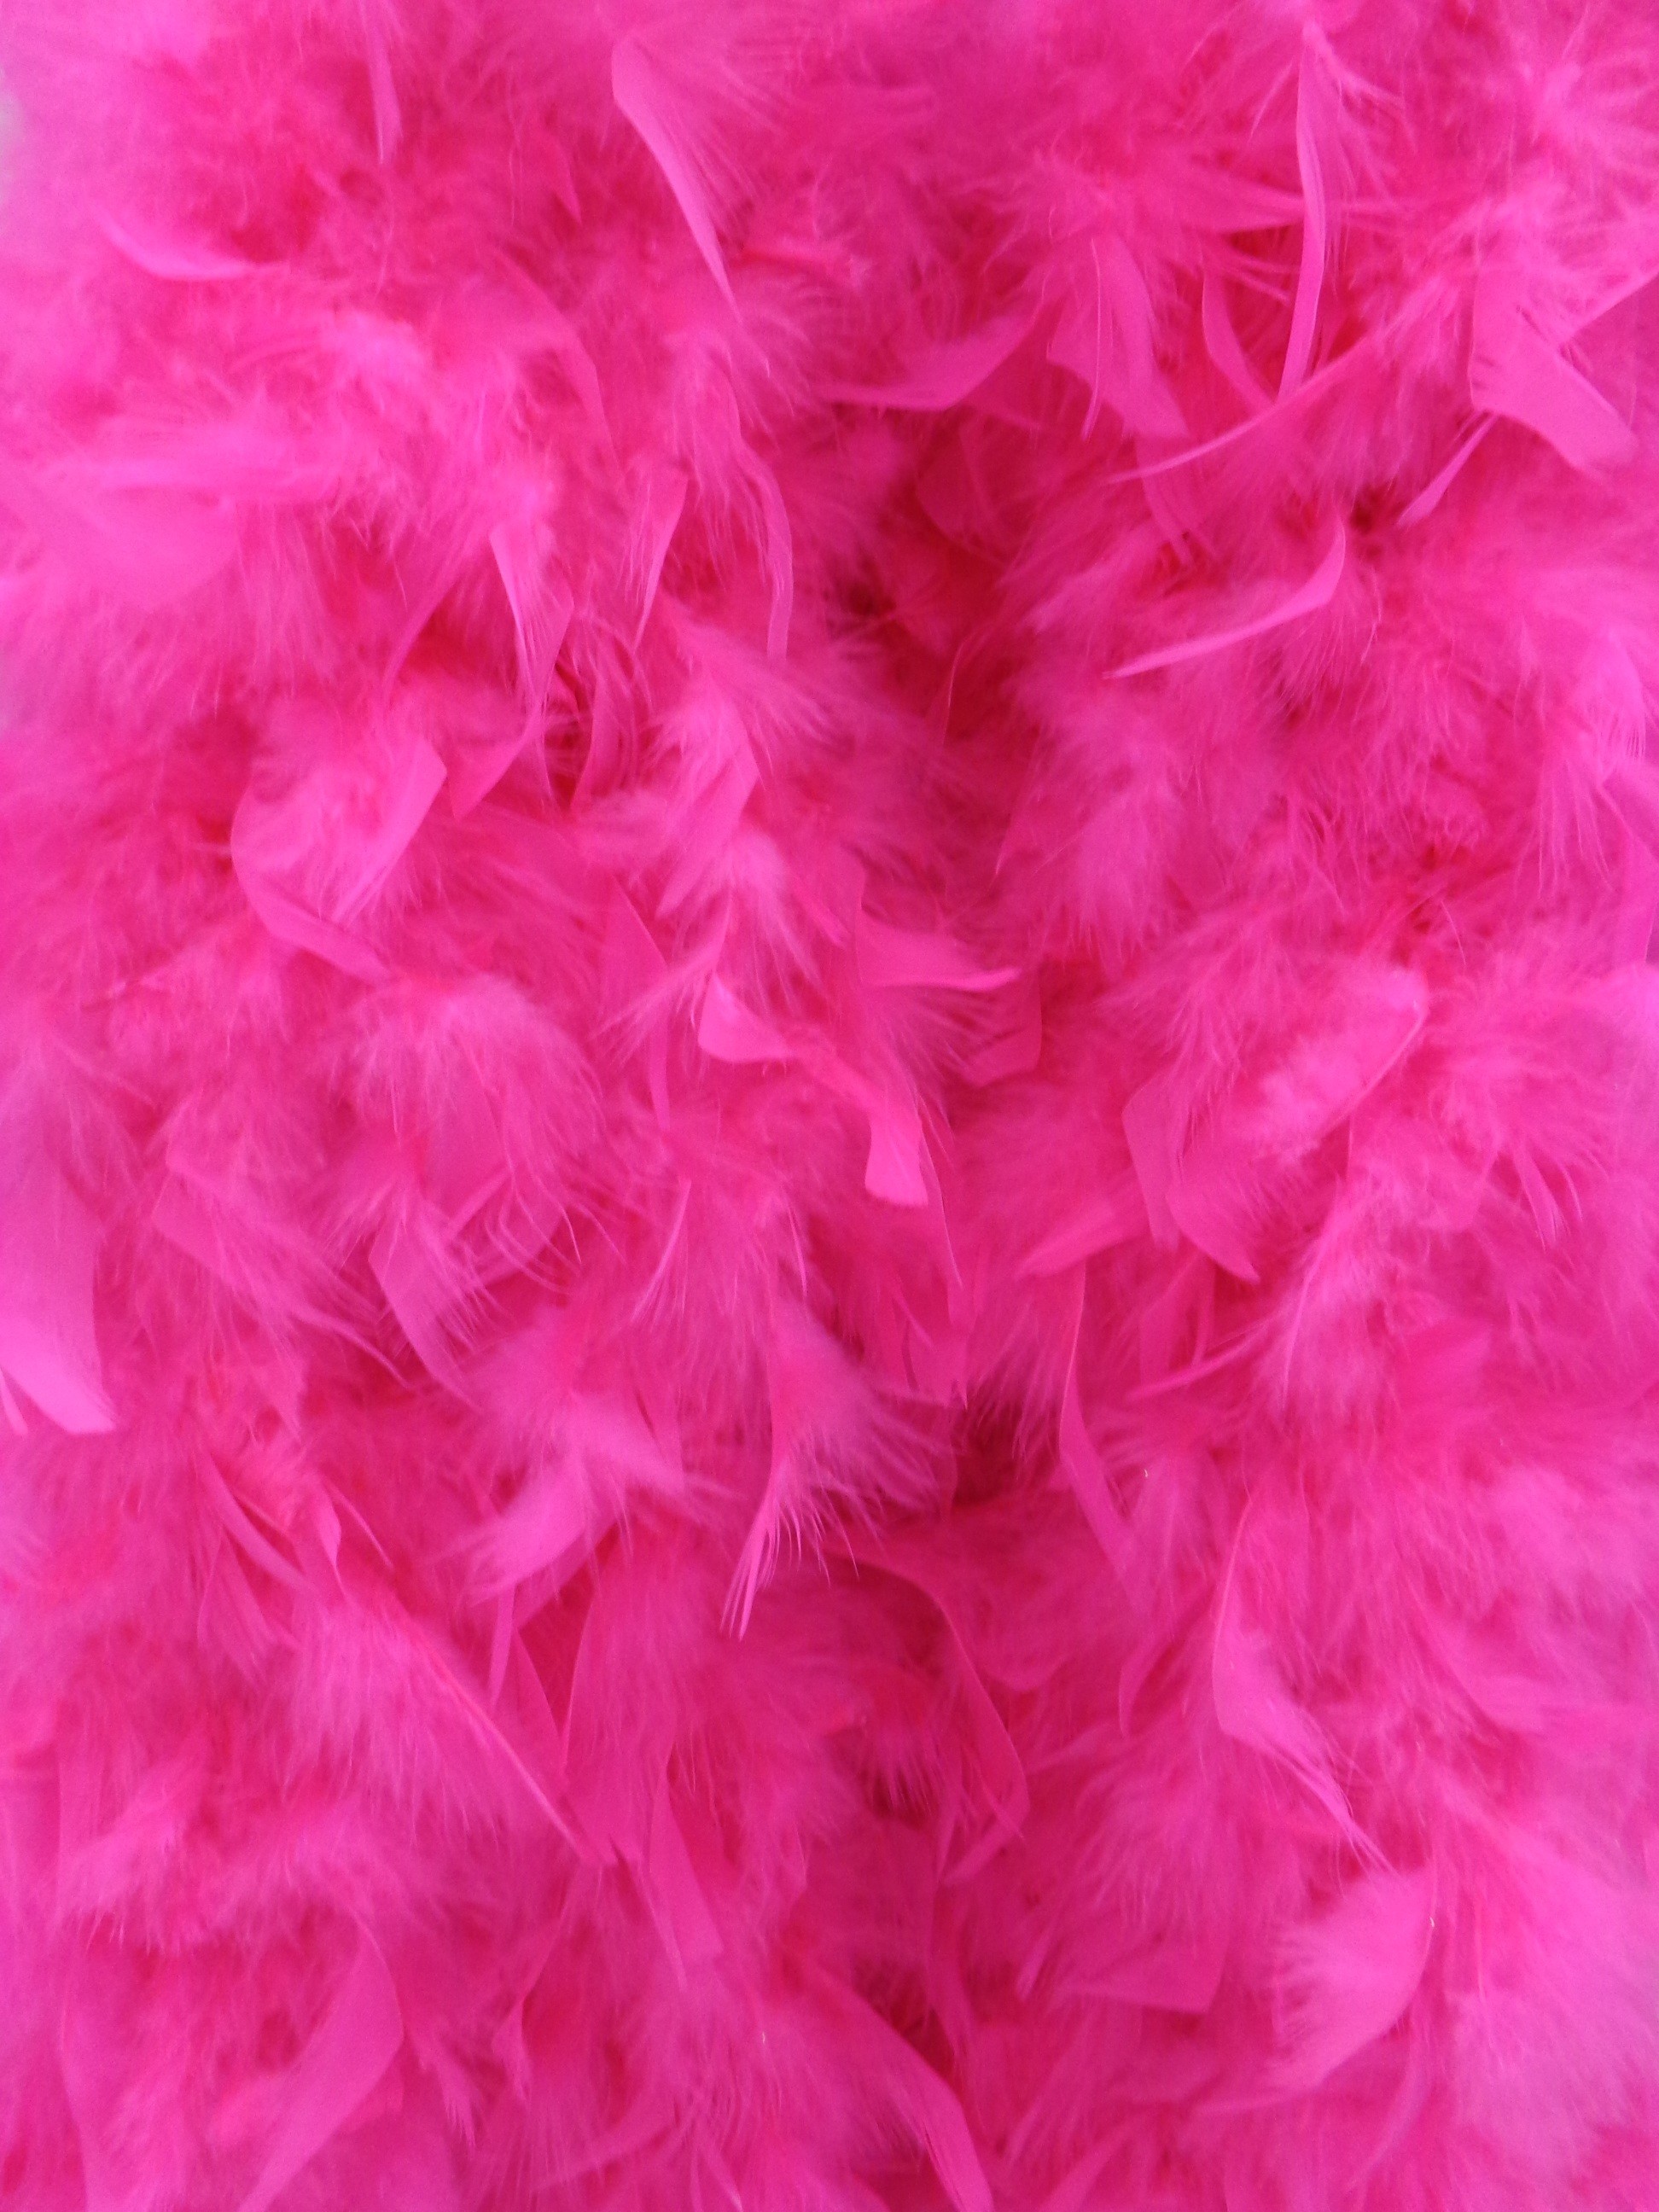 1944x2592 bird wing texture petal fur fluffy color pink feather material background  feathers delicate magenta puff fashion